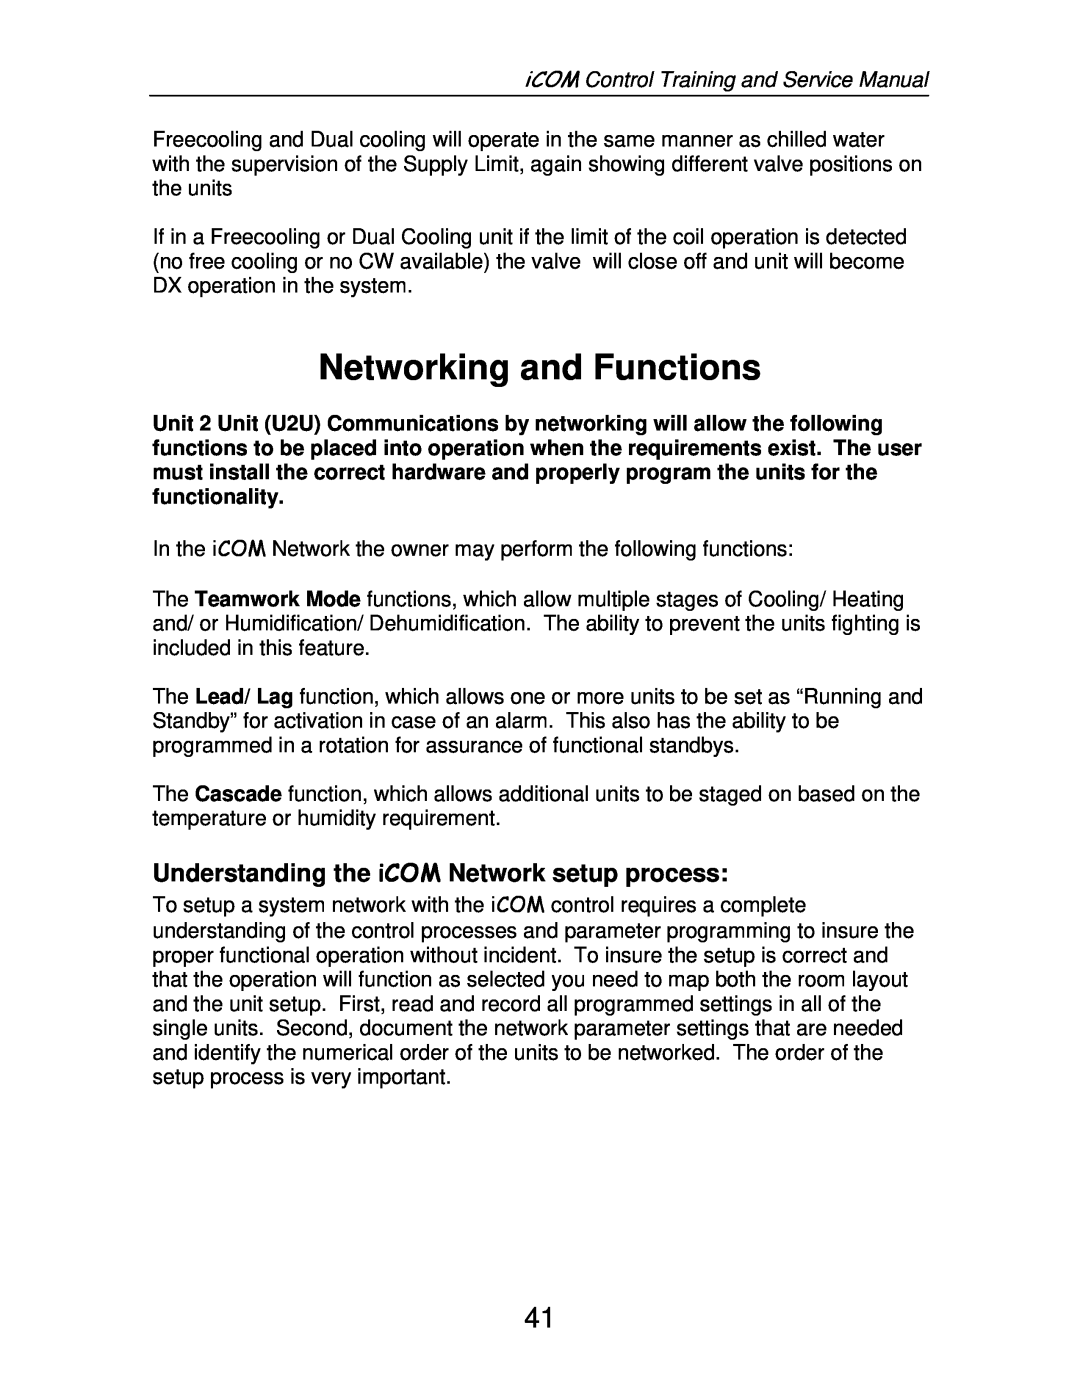 Liebert TM-10098 service manual Networking and Functions, Understanding the iCOM Network setup process 